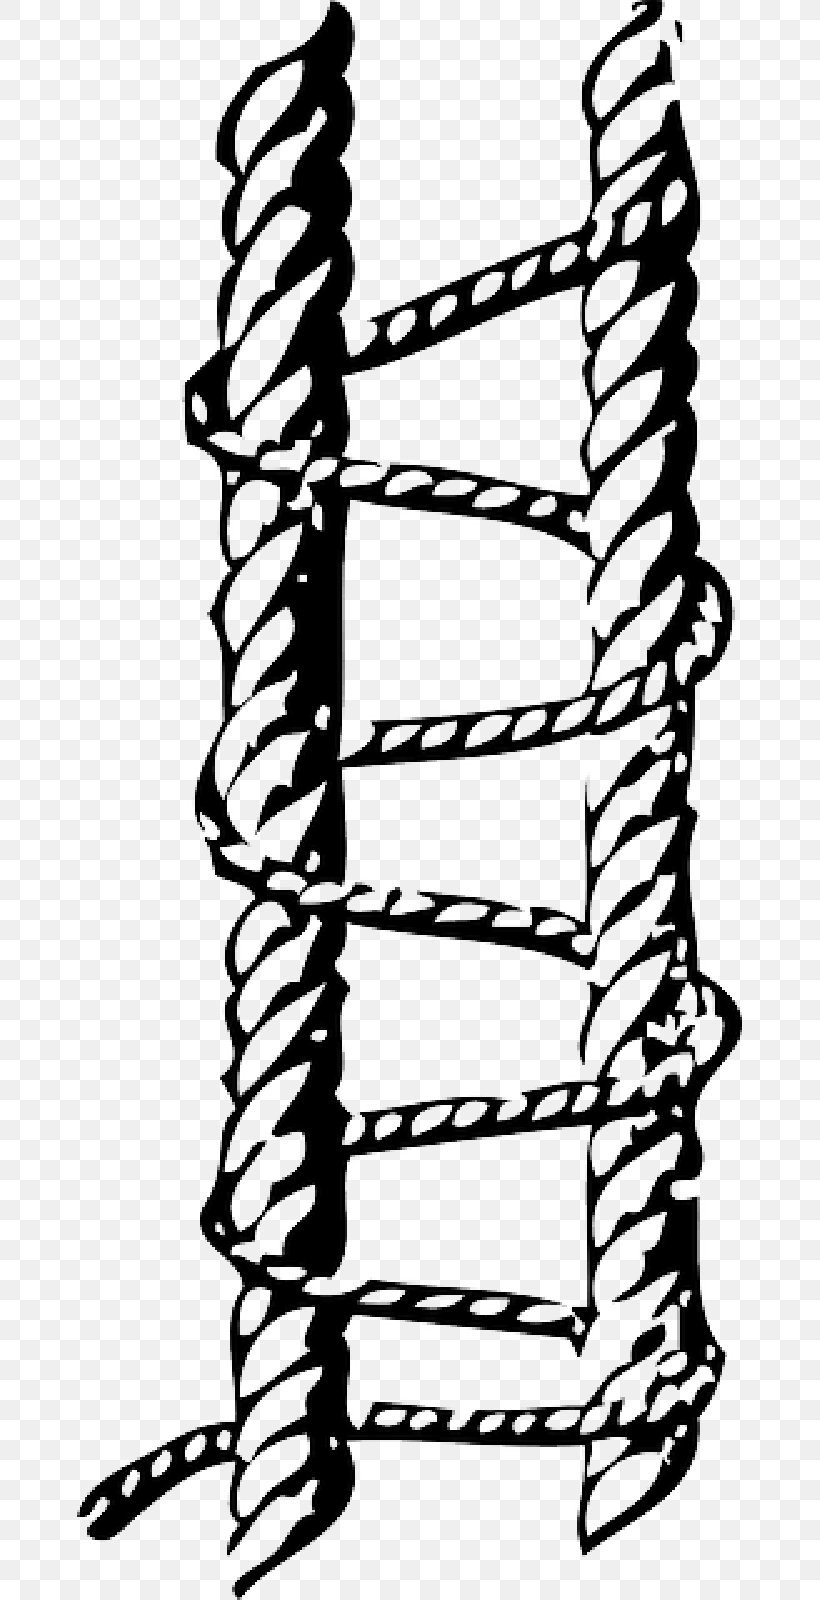 Knot Seizing Rope Splicing Vector Graphics Clip Art, PNG, 800x1600px, Knot, Bight, Bowline, Celtic Knot, Half Hitch Download Free